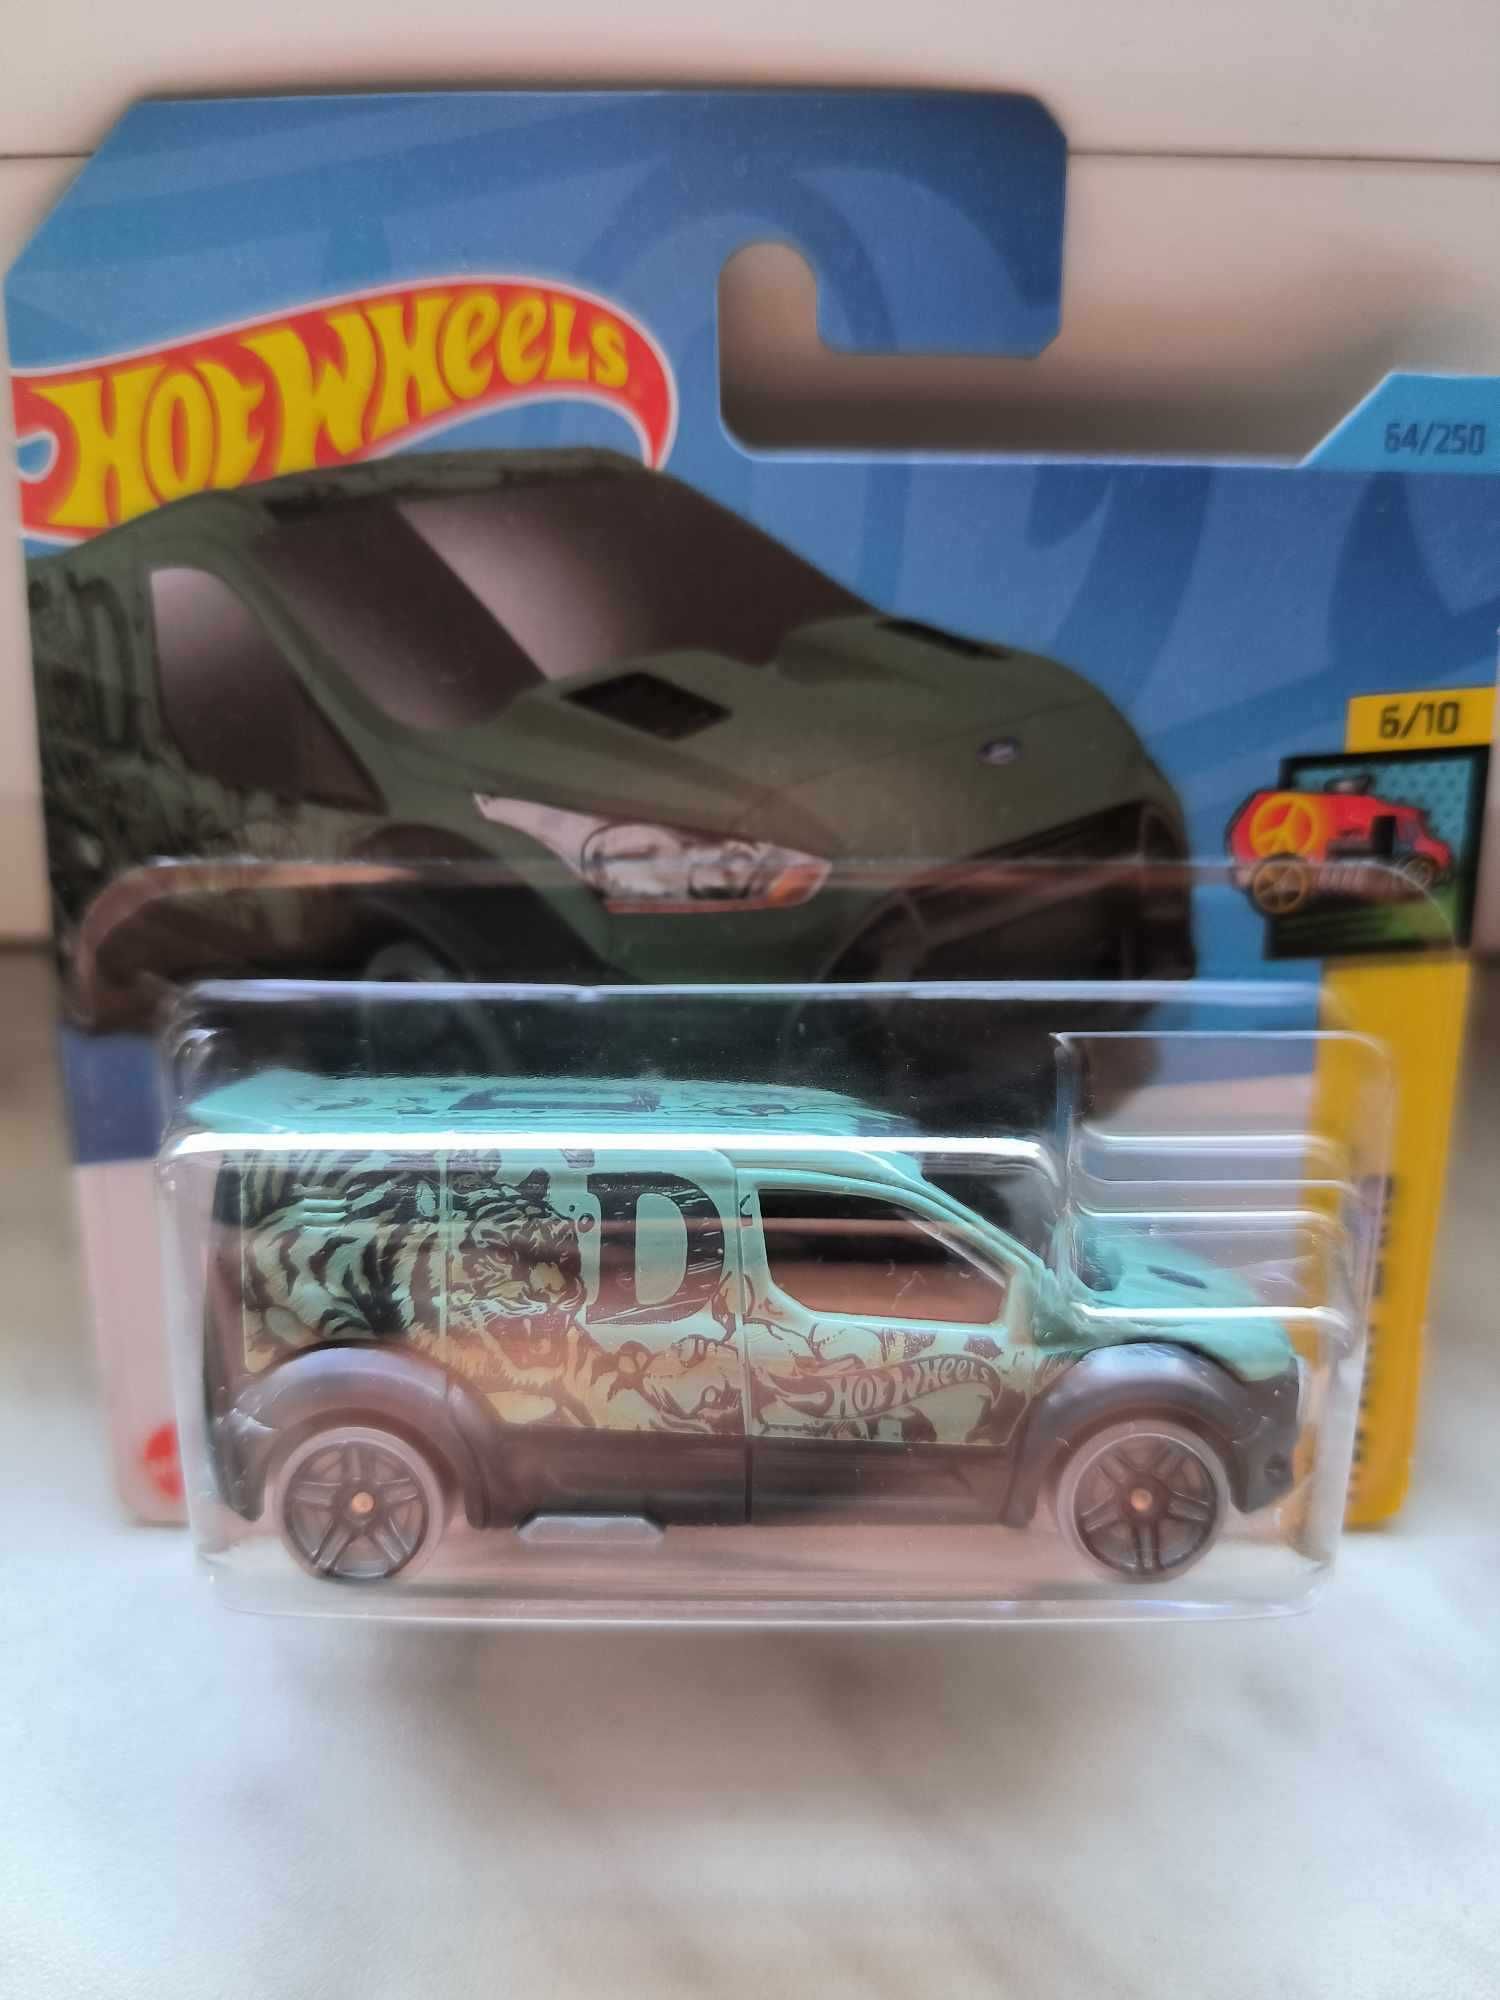 Hot Wheels Ford Transit Connect